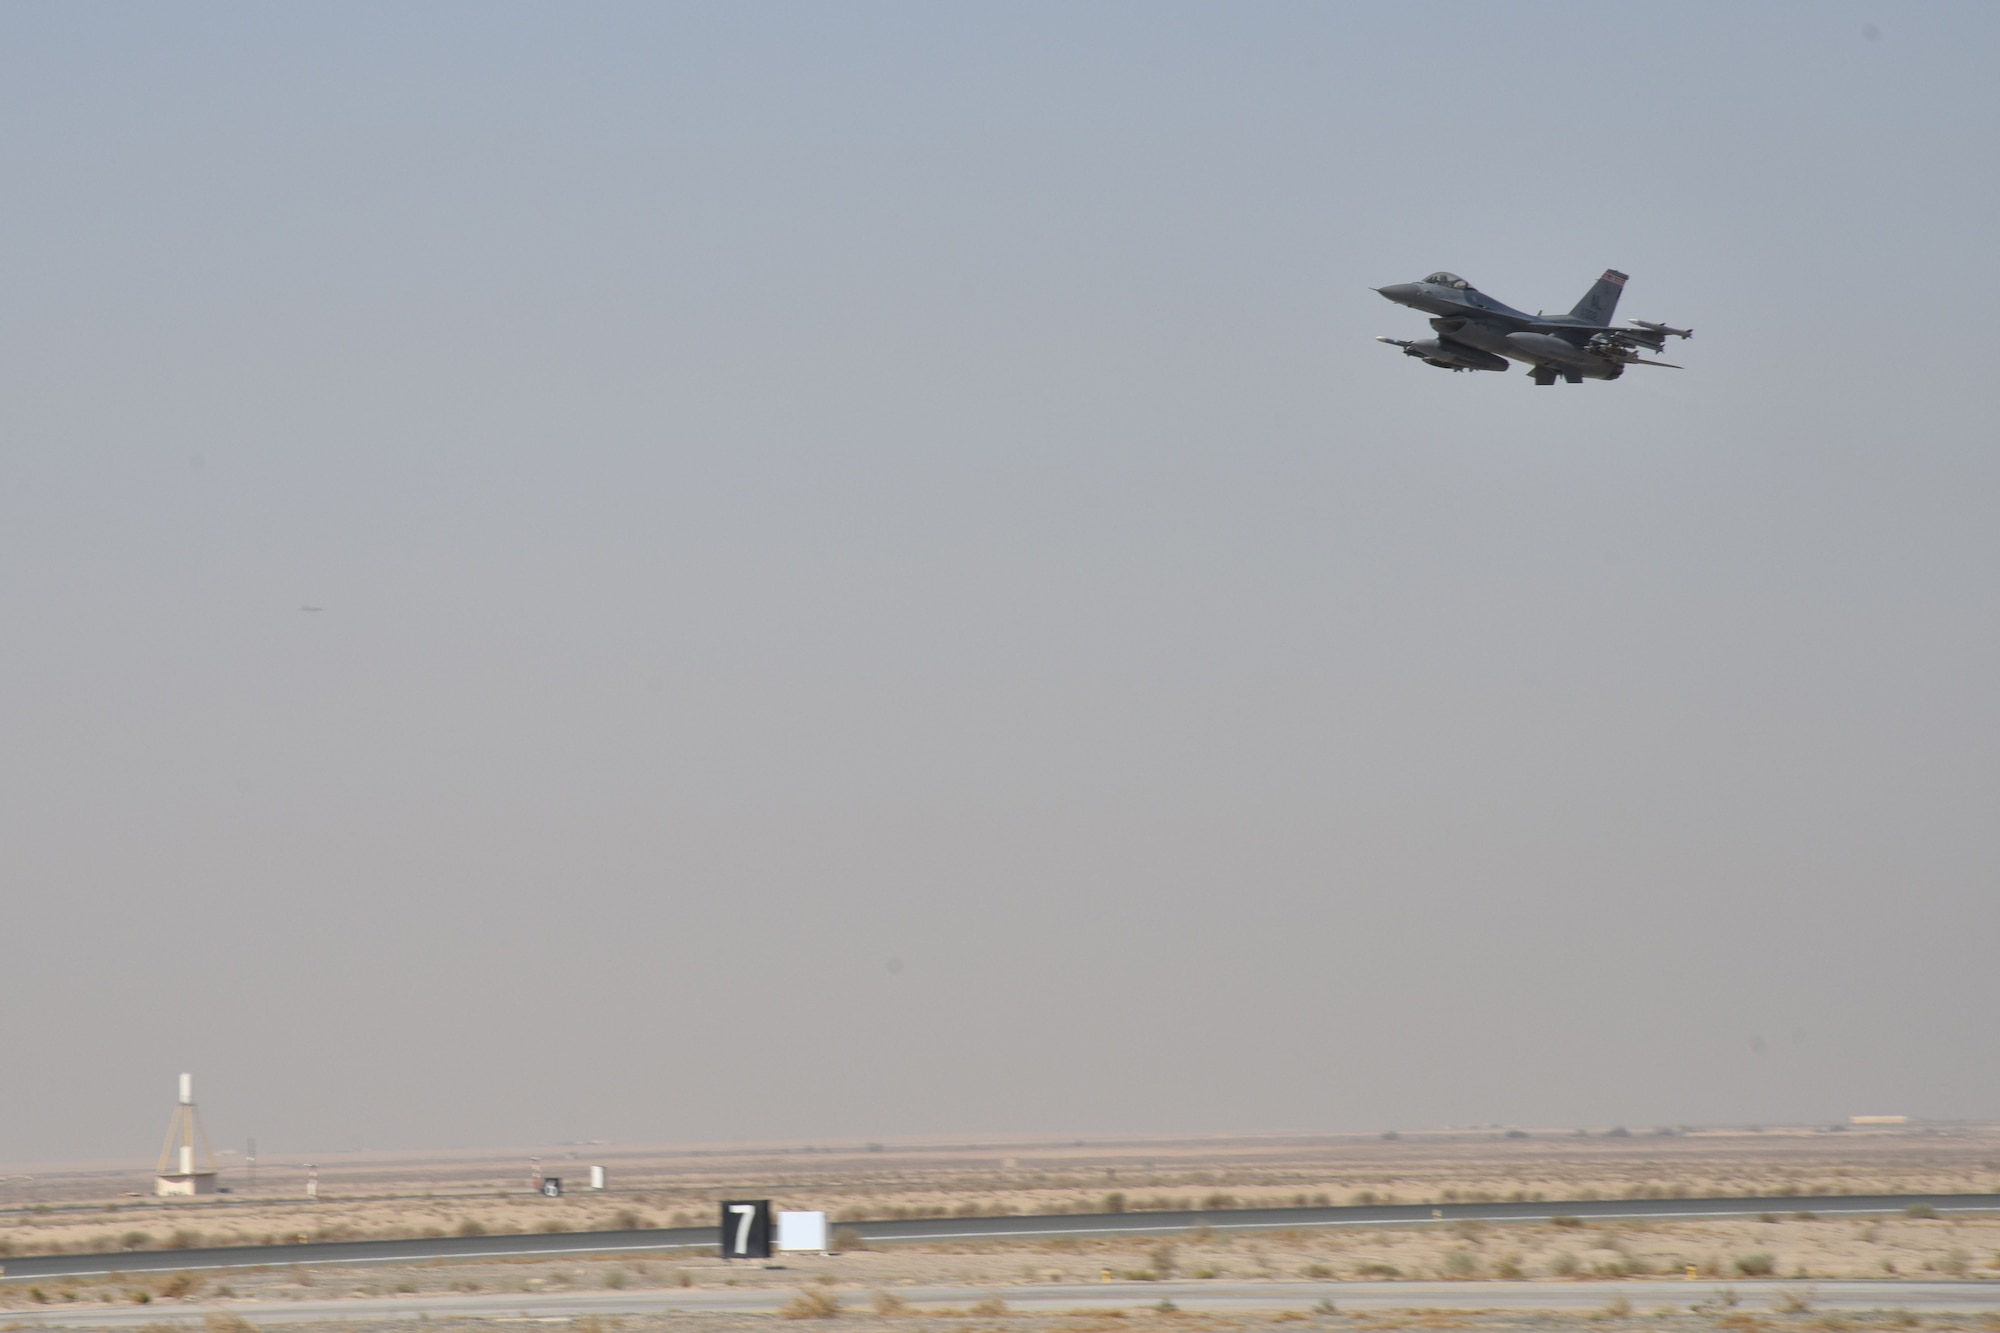 An F-16 Fighting Falcon takes off from an undisclosed location in Southwest Asia, Jan. 18, 2018. This was the last mission this pilot and aircraft performed while on their current deployment. (U.S. Air Force photo by Staff Sgt. Joshua Edwards/Released)